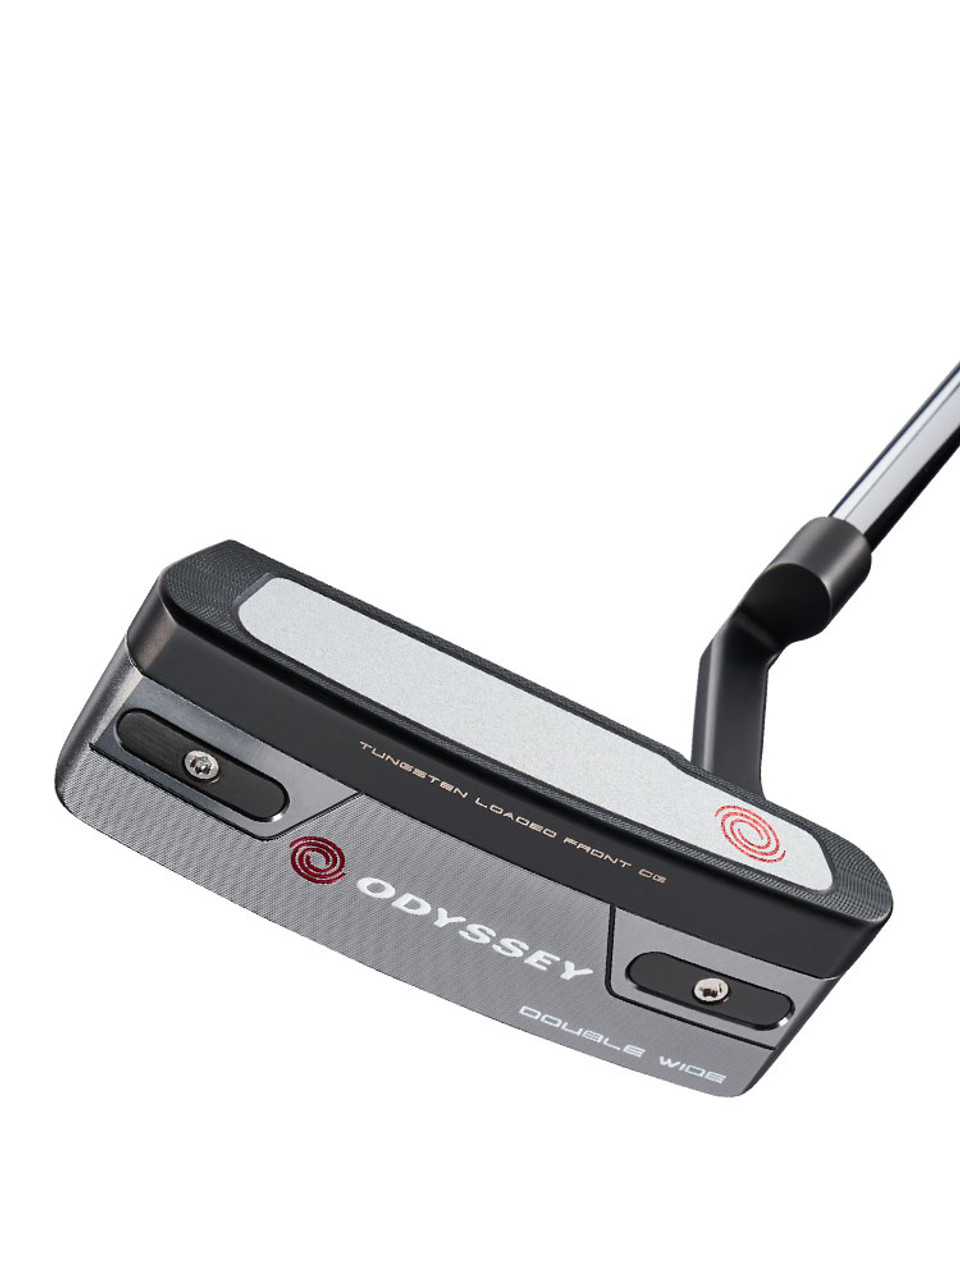 Odyssey Tri-Hot 5K Putter - Double Wide CH | GolfBox